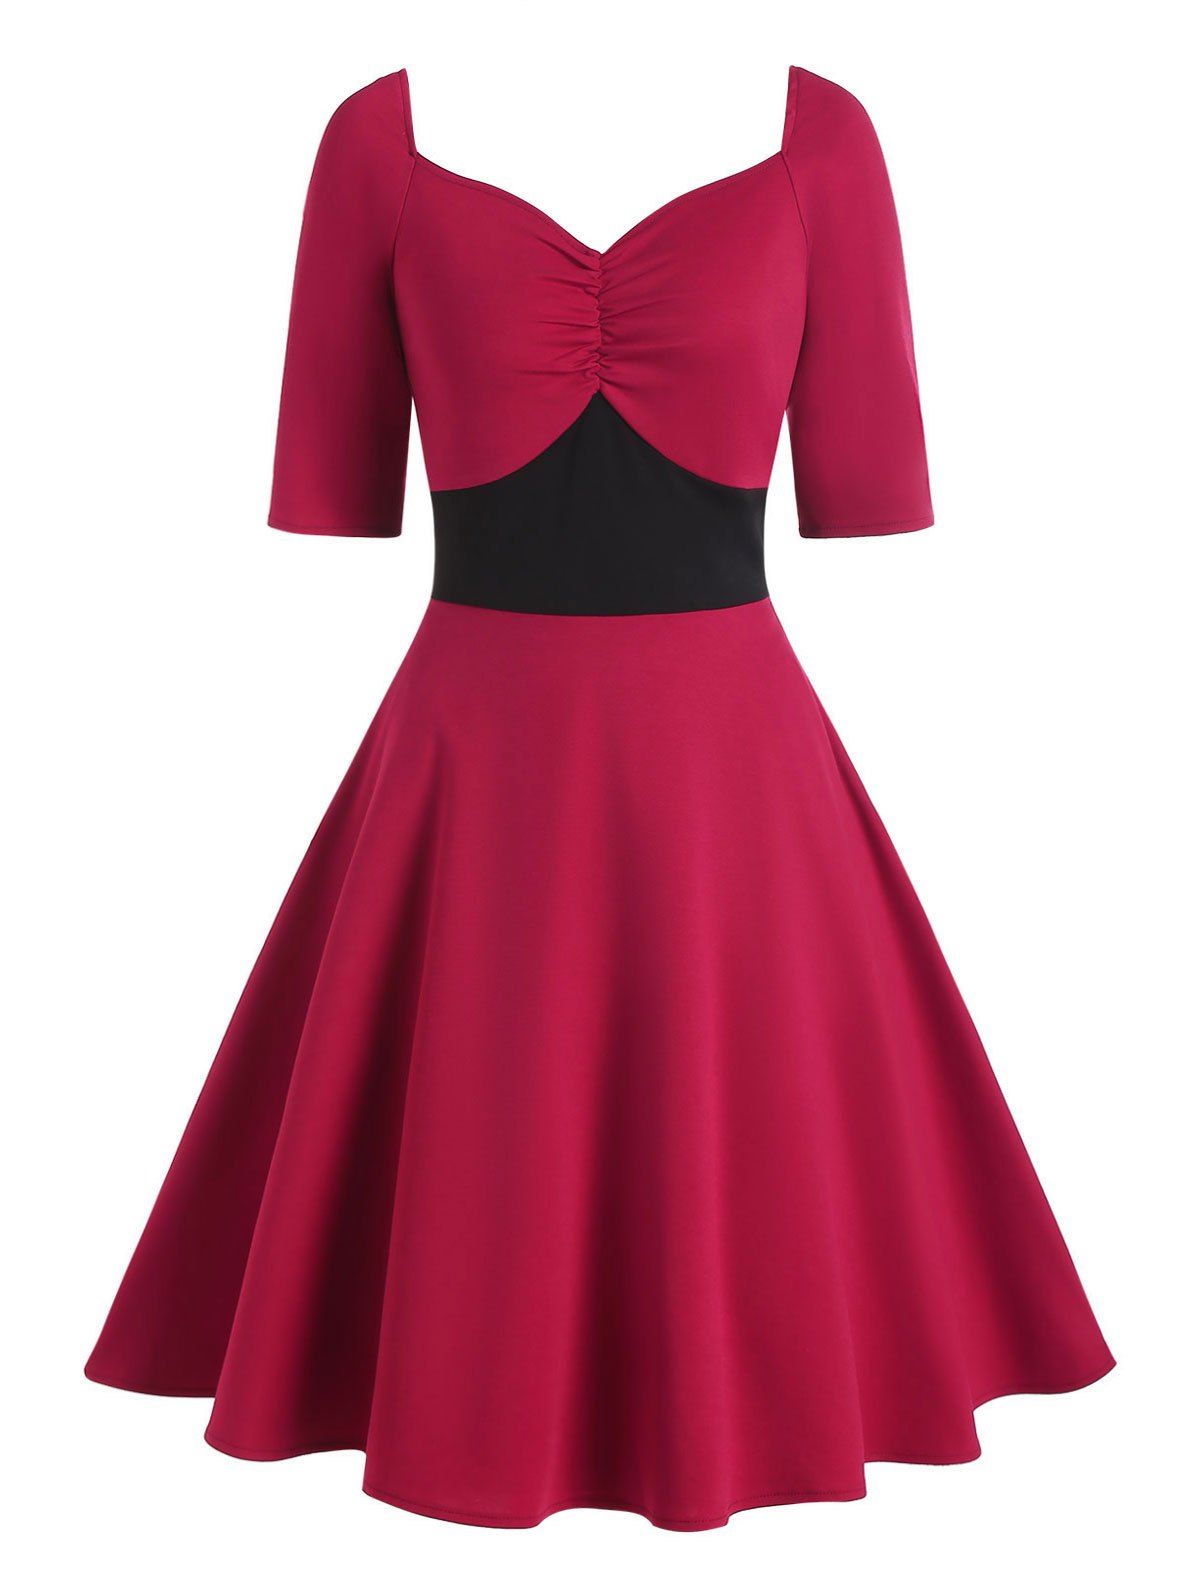 Ruched Colorblock Empire Waist Dress - RED L